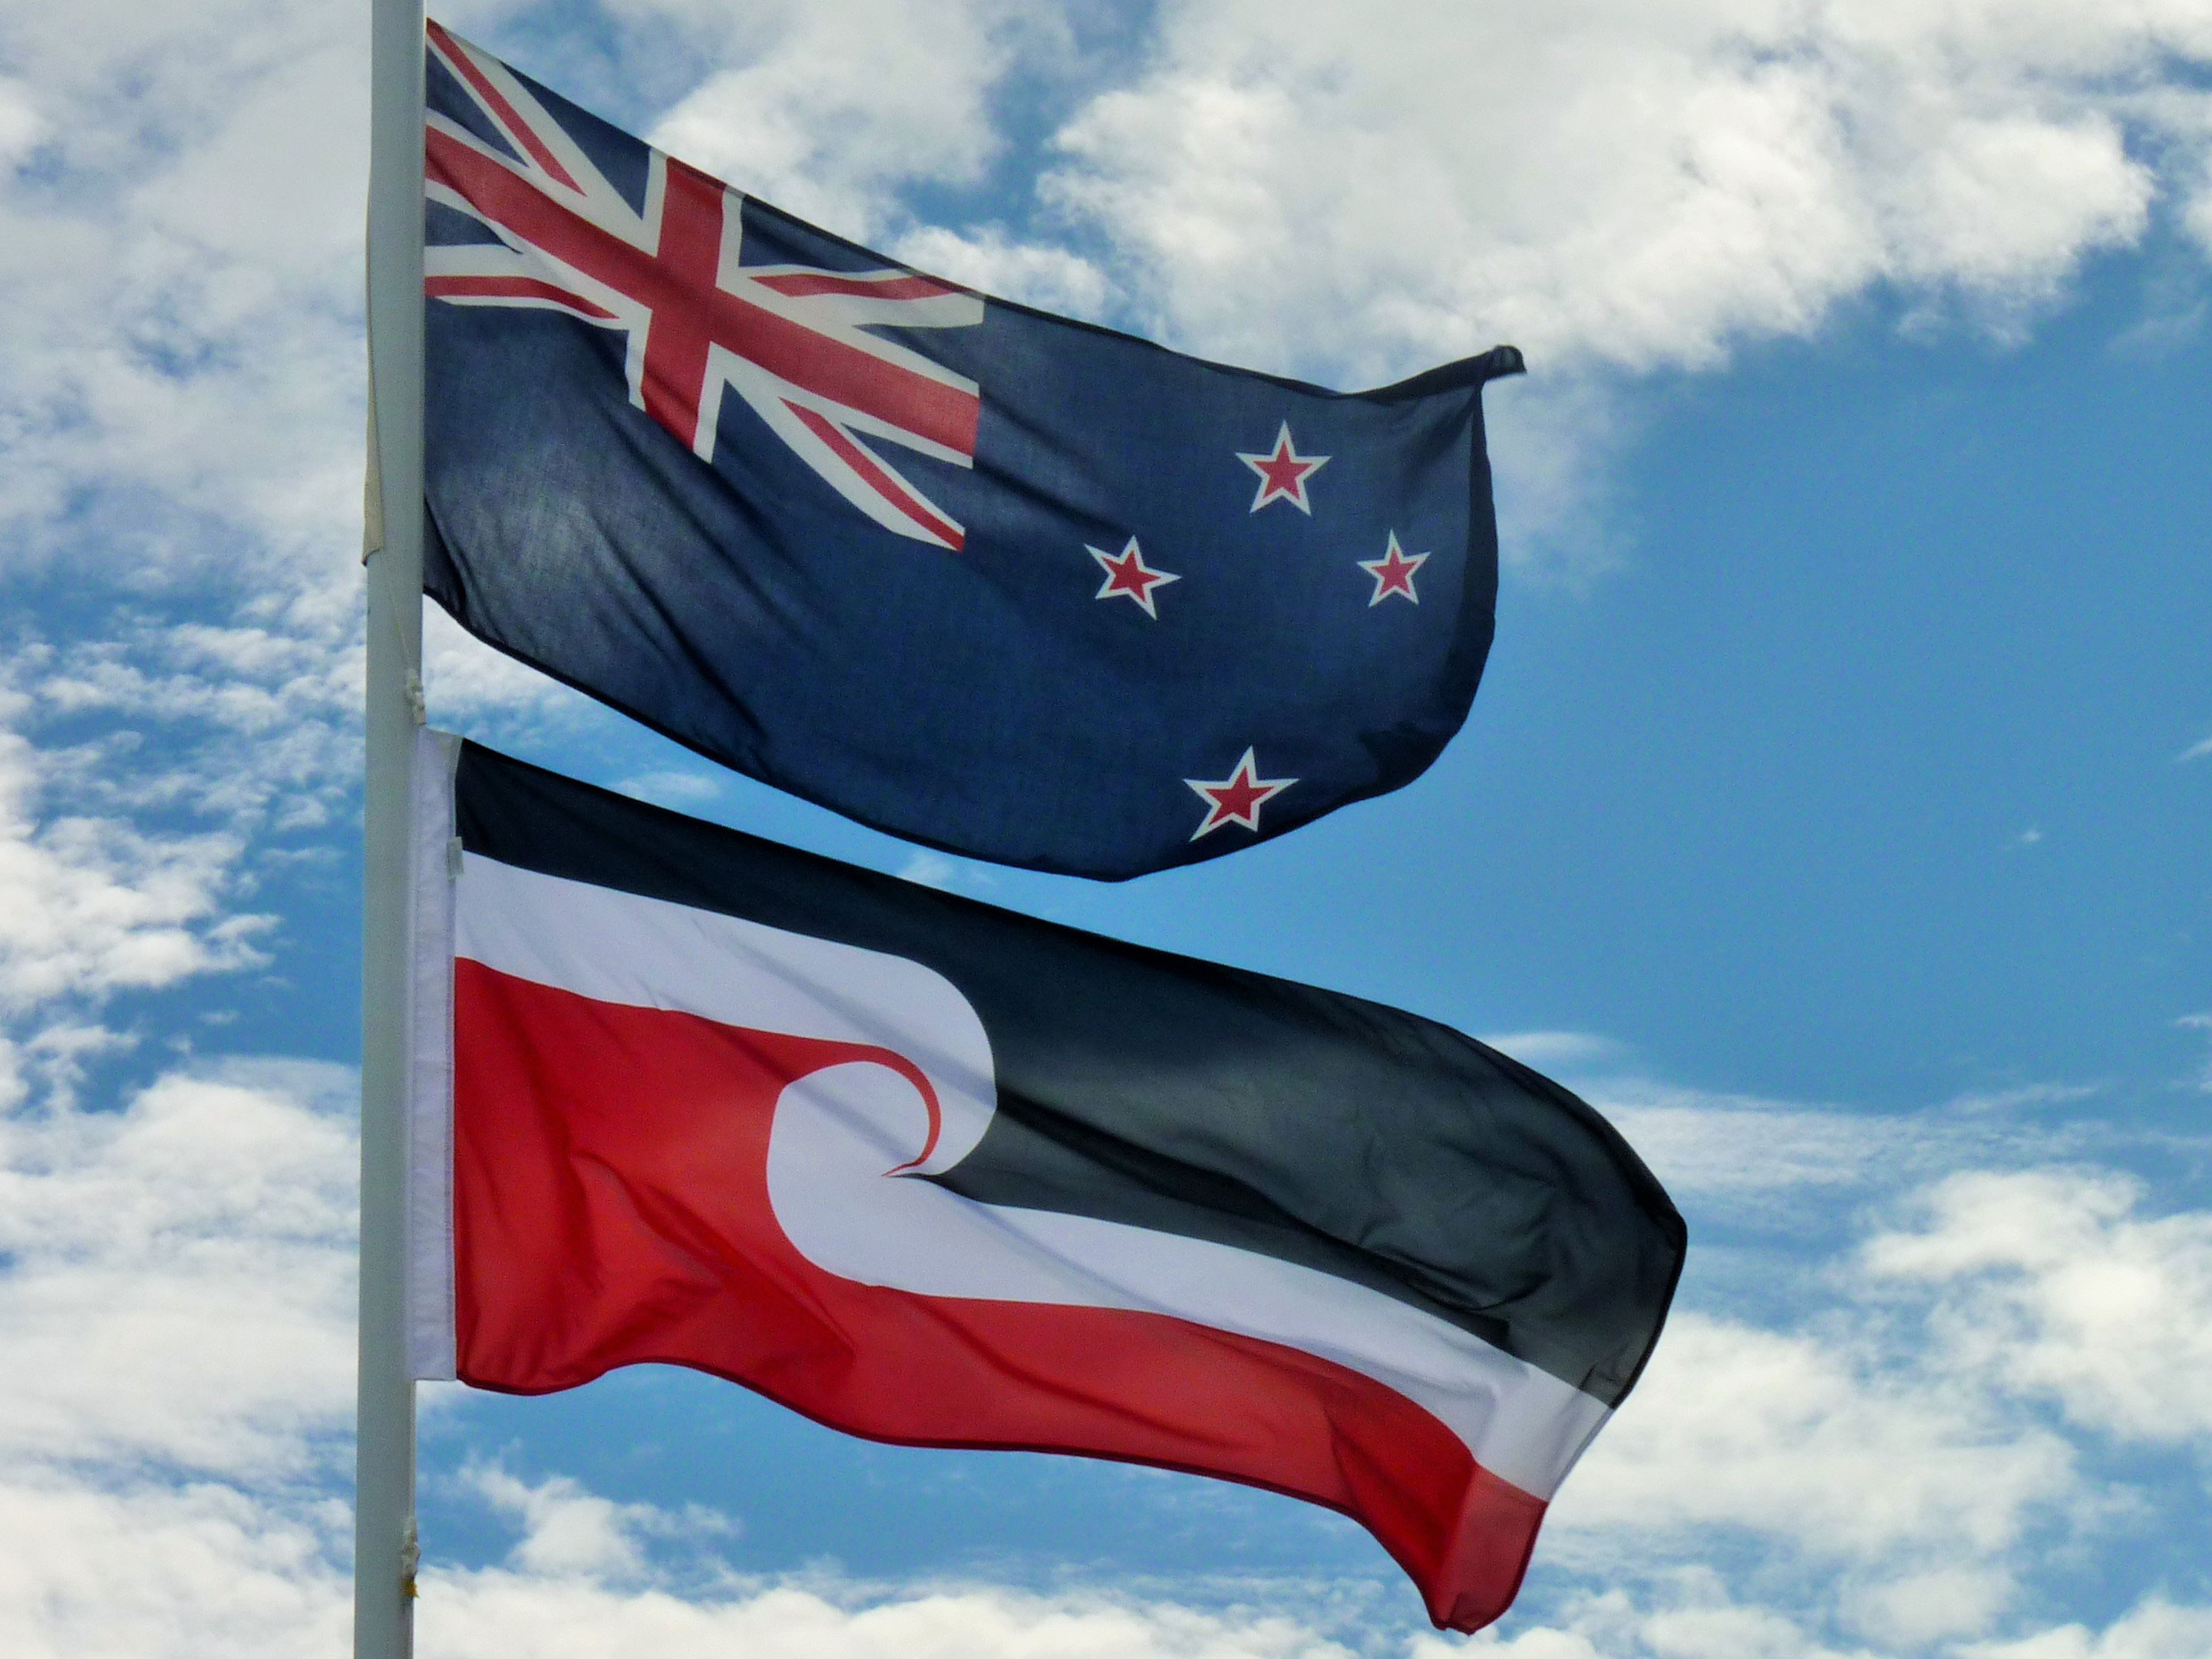 On top is the New Zealand flag; on the bottom is the Maori flag